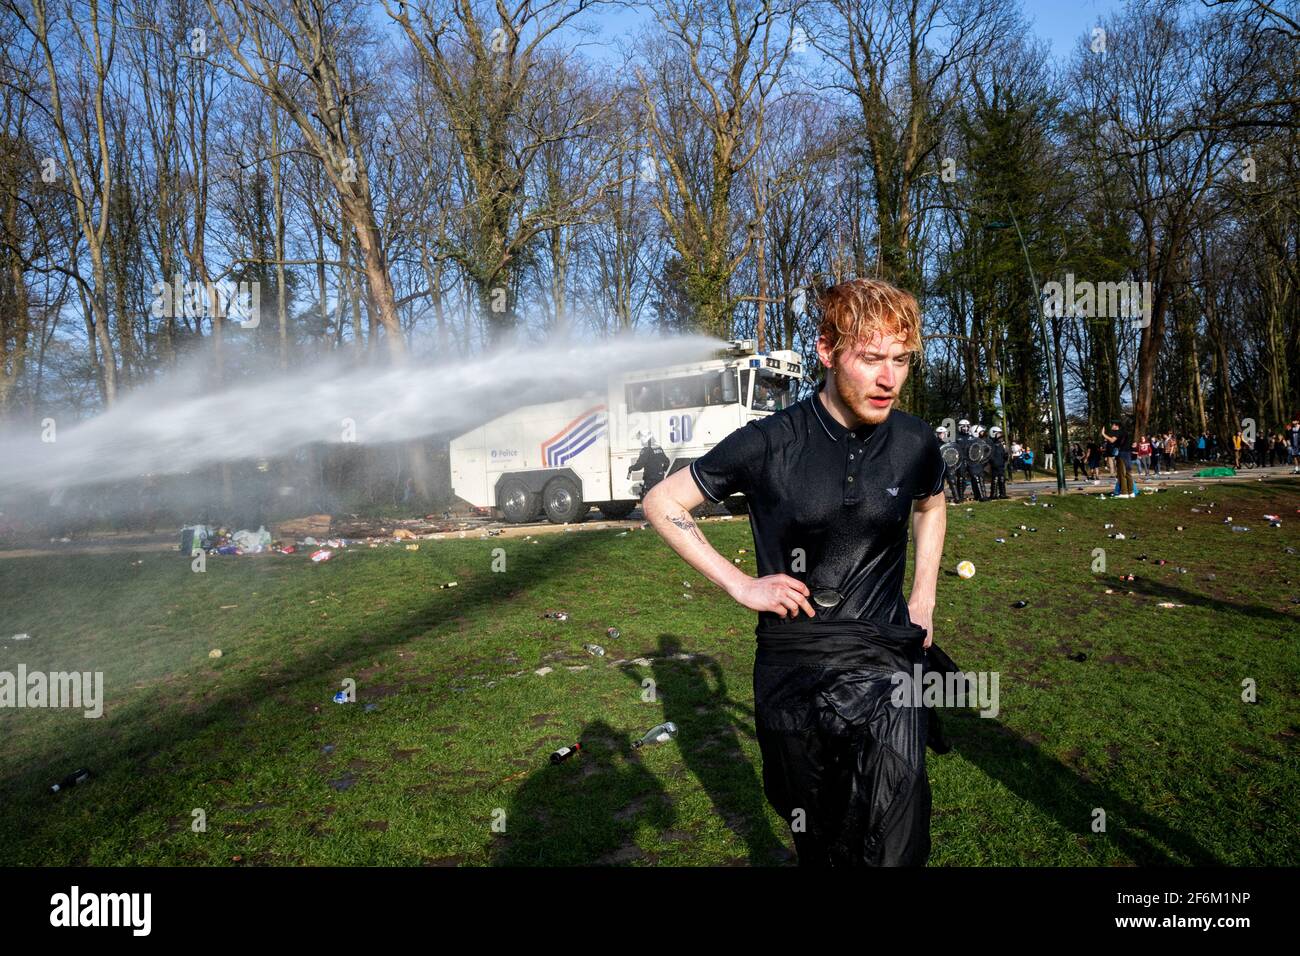 Illustration picture shows a boy with drenched clothes at the Bois de La Cambre - Ter Kamerenbos, in Brussels, Thursday 01 April 2021. The Brussels lo Stock Photo